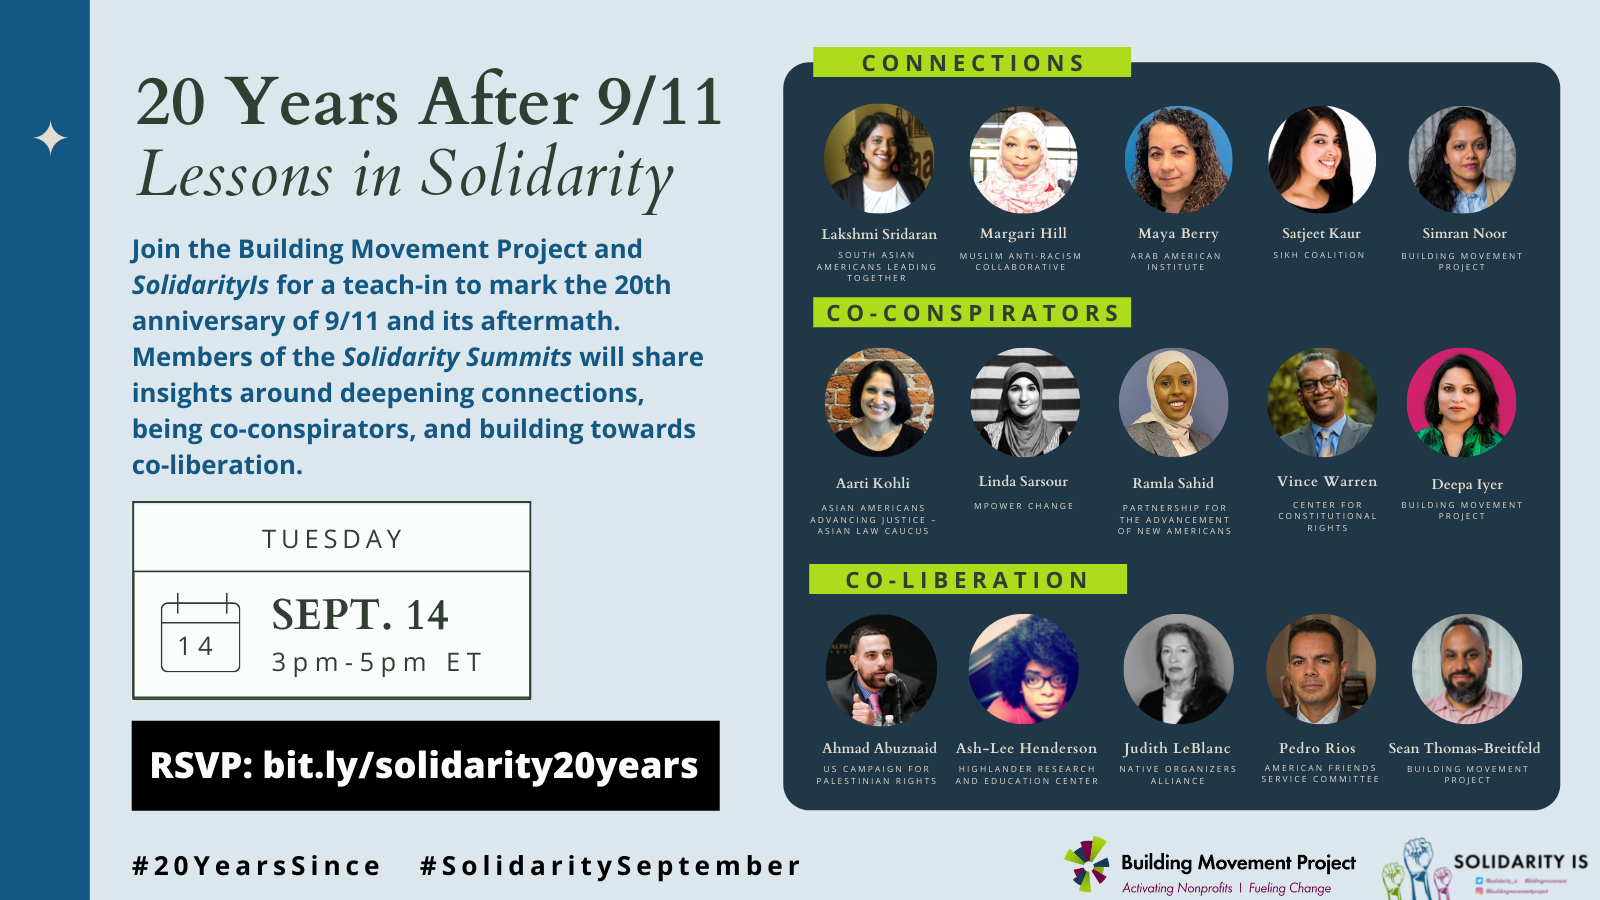 20 Years After 9/11: Lessons in Solidarity